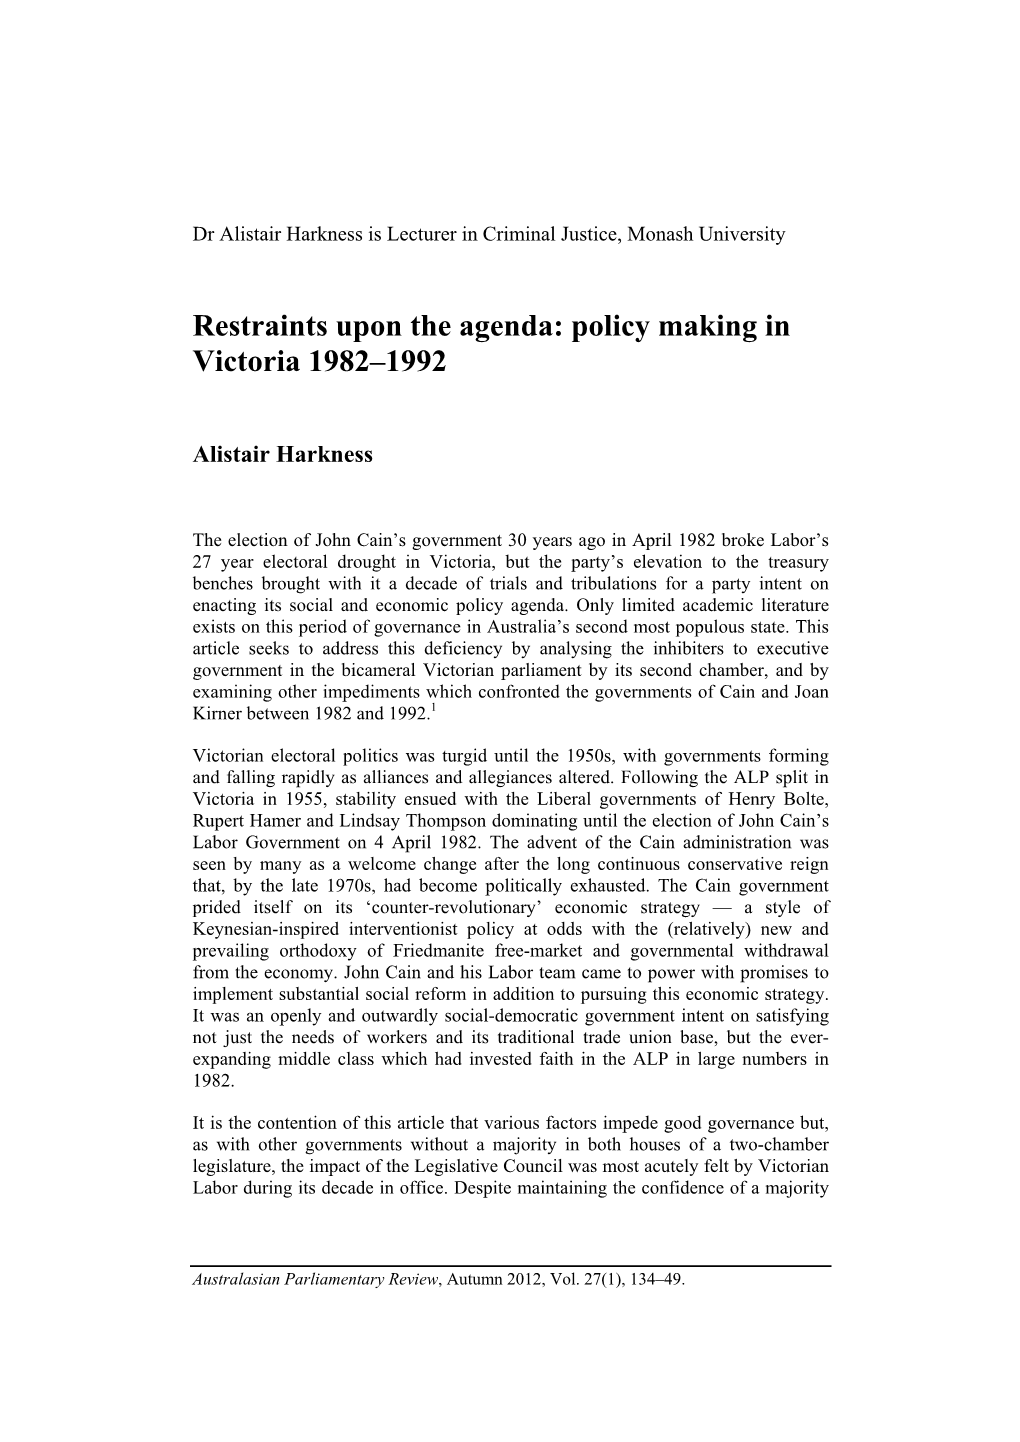 Restraints Upon the Agenda: Policy Making in Victoria 1982–1992